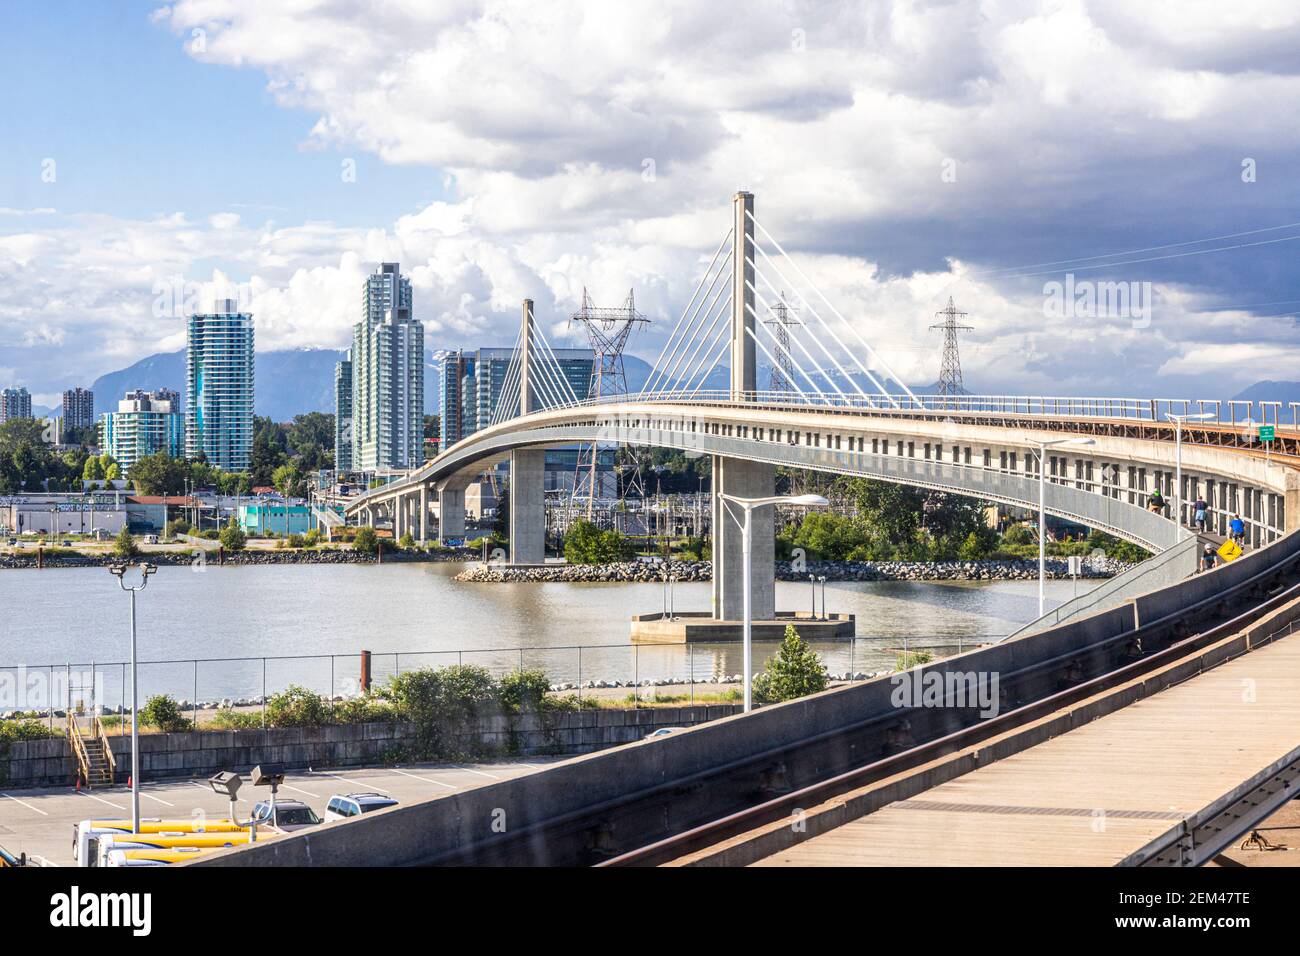 View from the TransLink SkyTrain on the Canada Line about to cross the Fraser River near Bridgeport, Vancouver, British Columbia, Canada Stock Photo